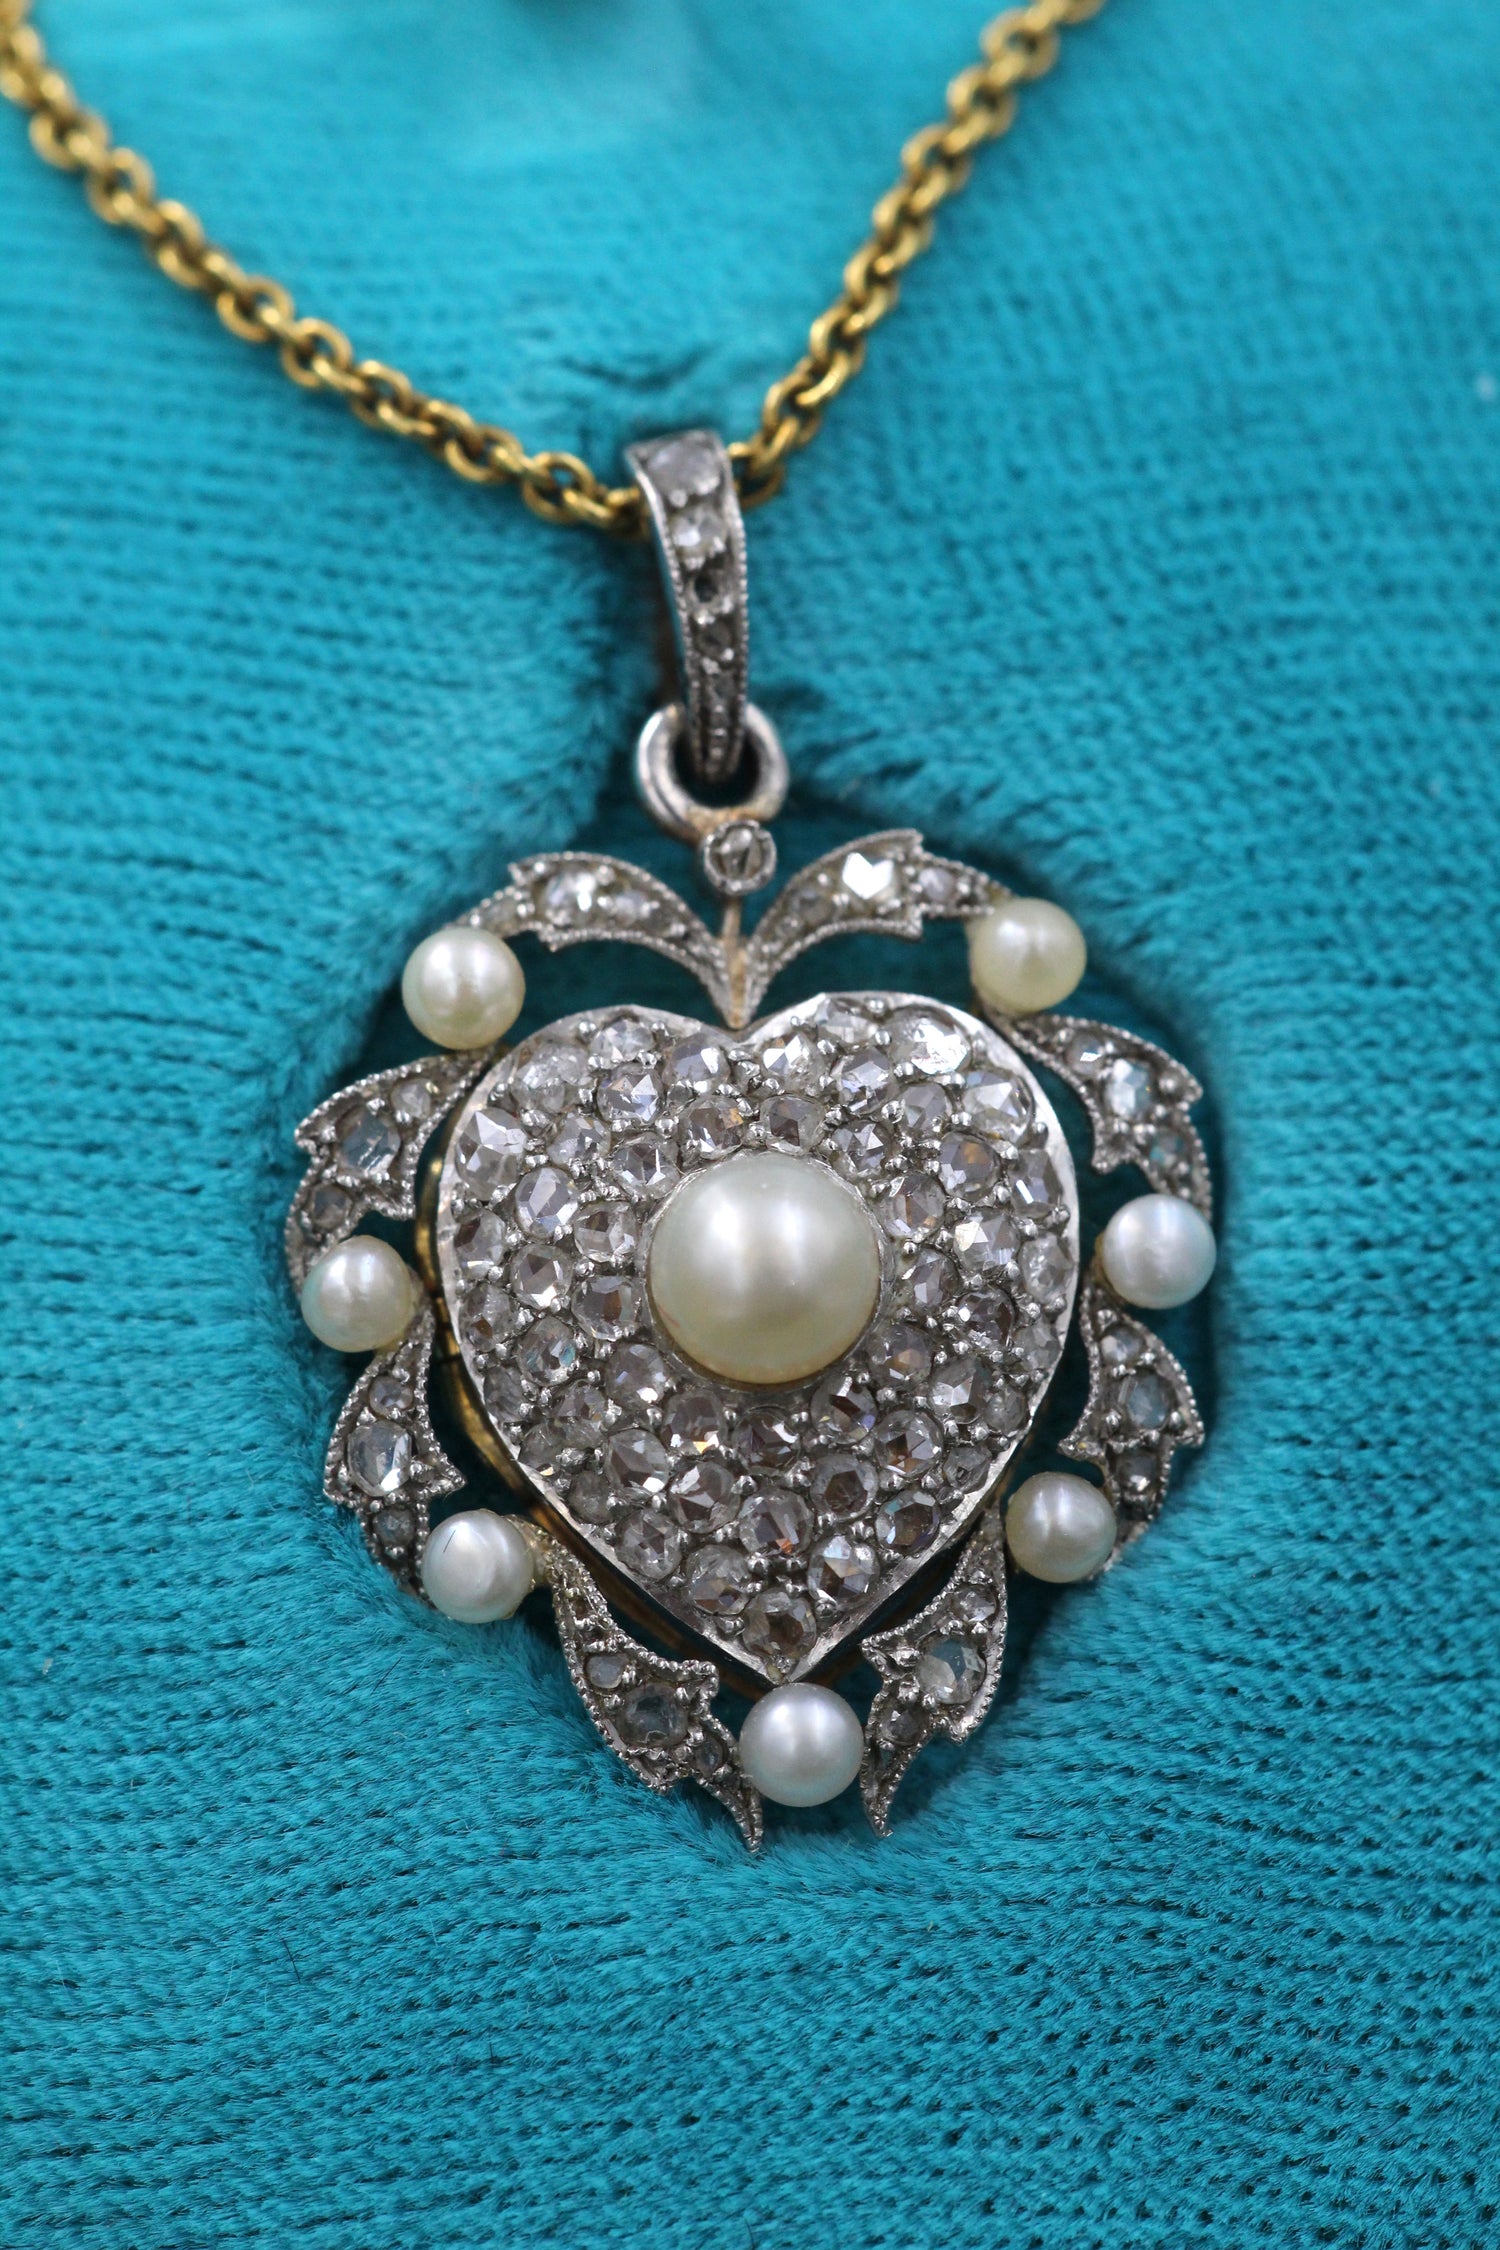 A very fine Victorian 15ct Yellow Gold (tested) & Platinum Heart Shaped Pearl and Diamond Locket Pendant. Circa 1900 - Robin Haydock Antiques